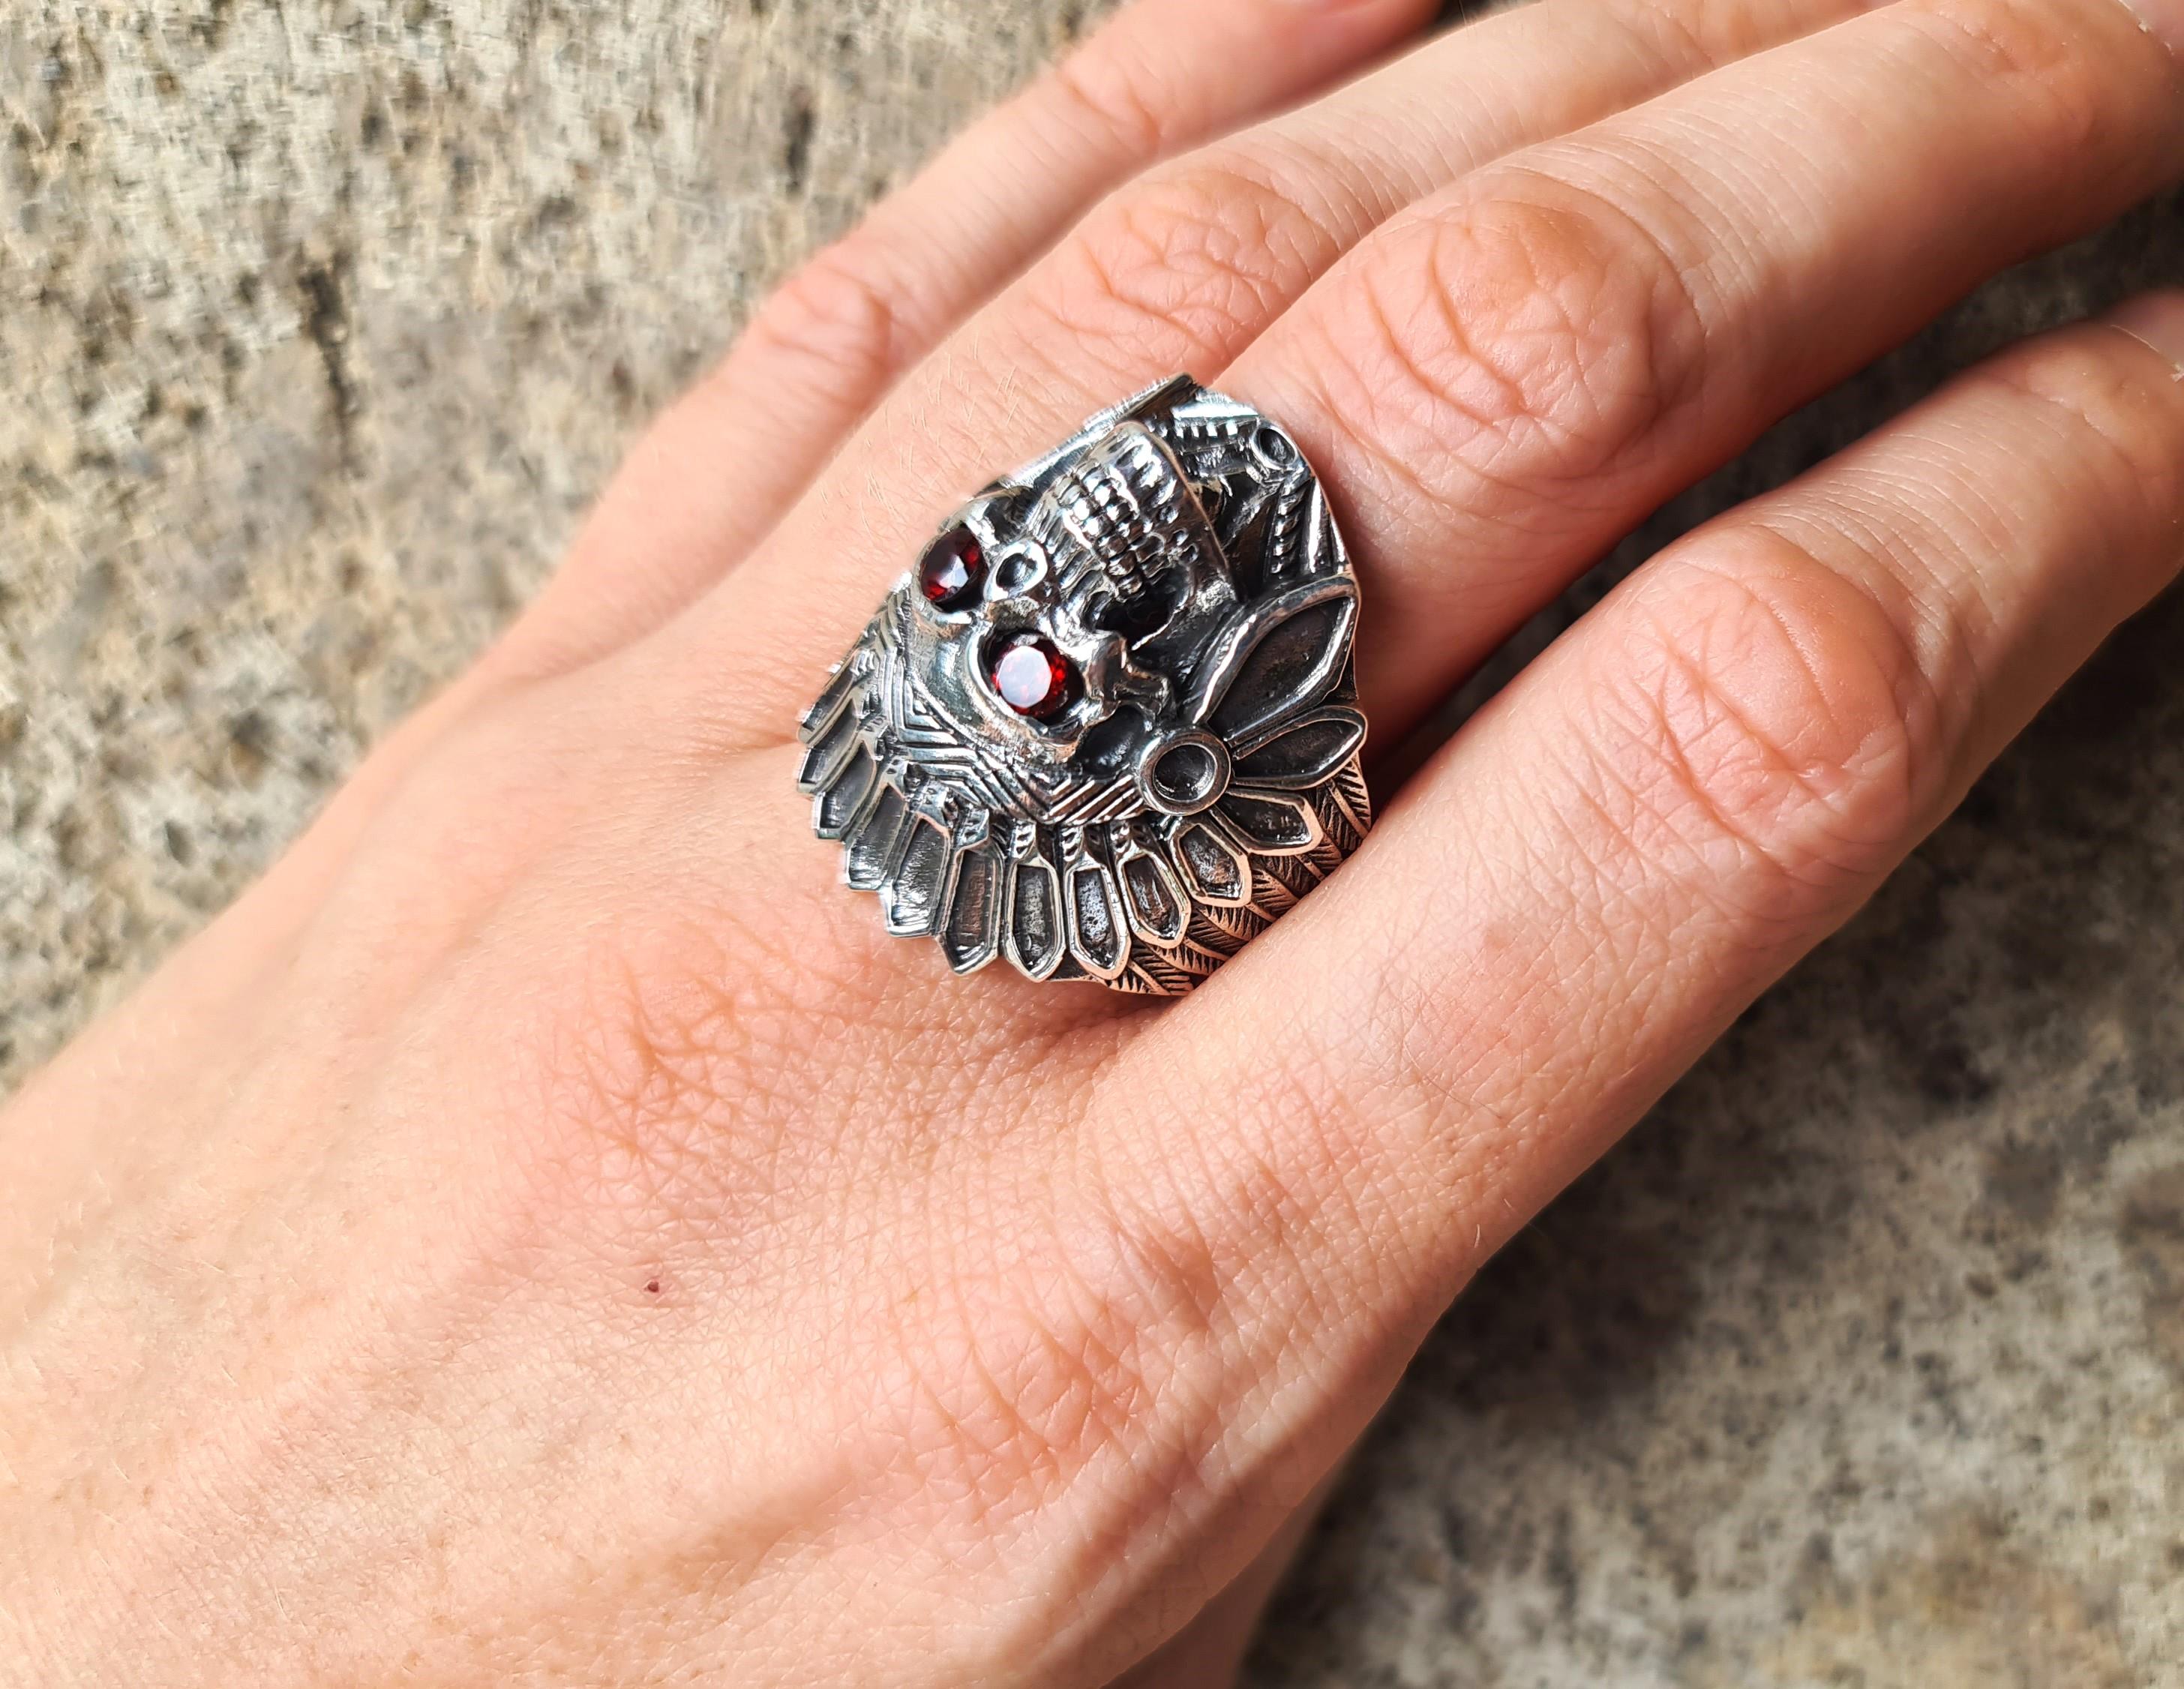 Garnet Eyes American Indian Skull Tribal Chief Warrior Ring Sterling Silver 925 For Sale 3